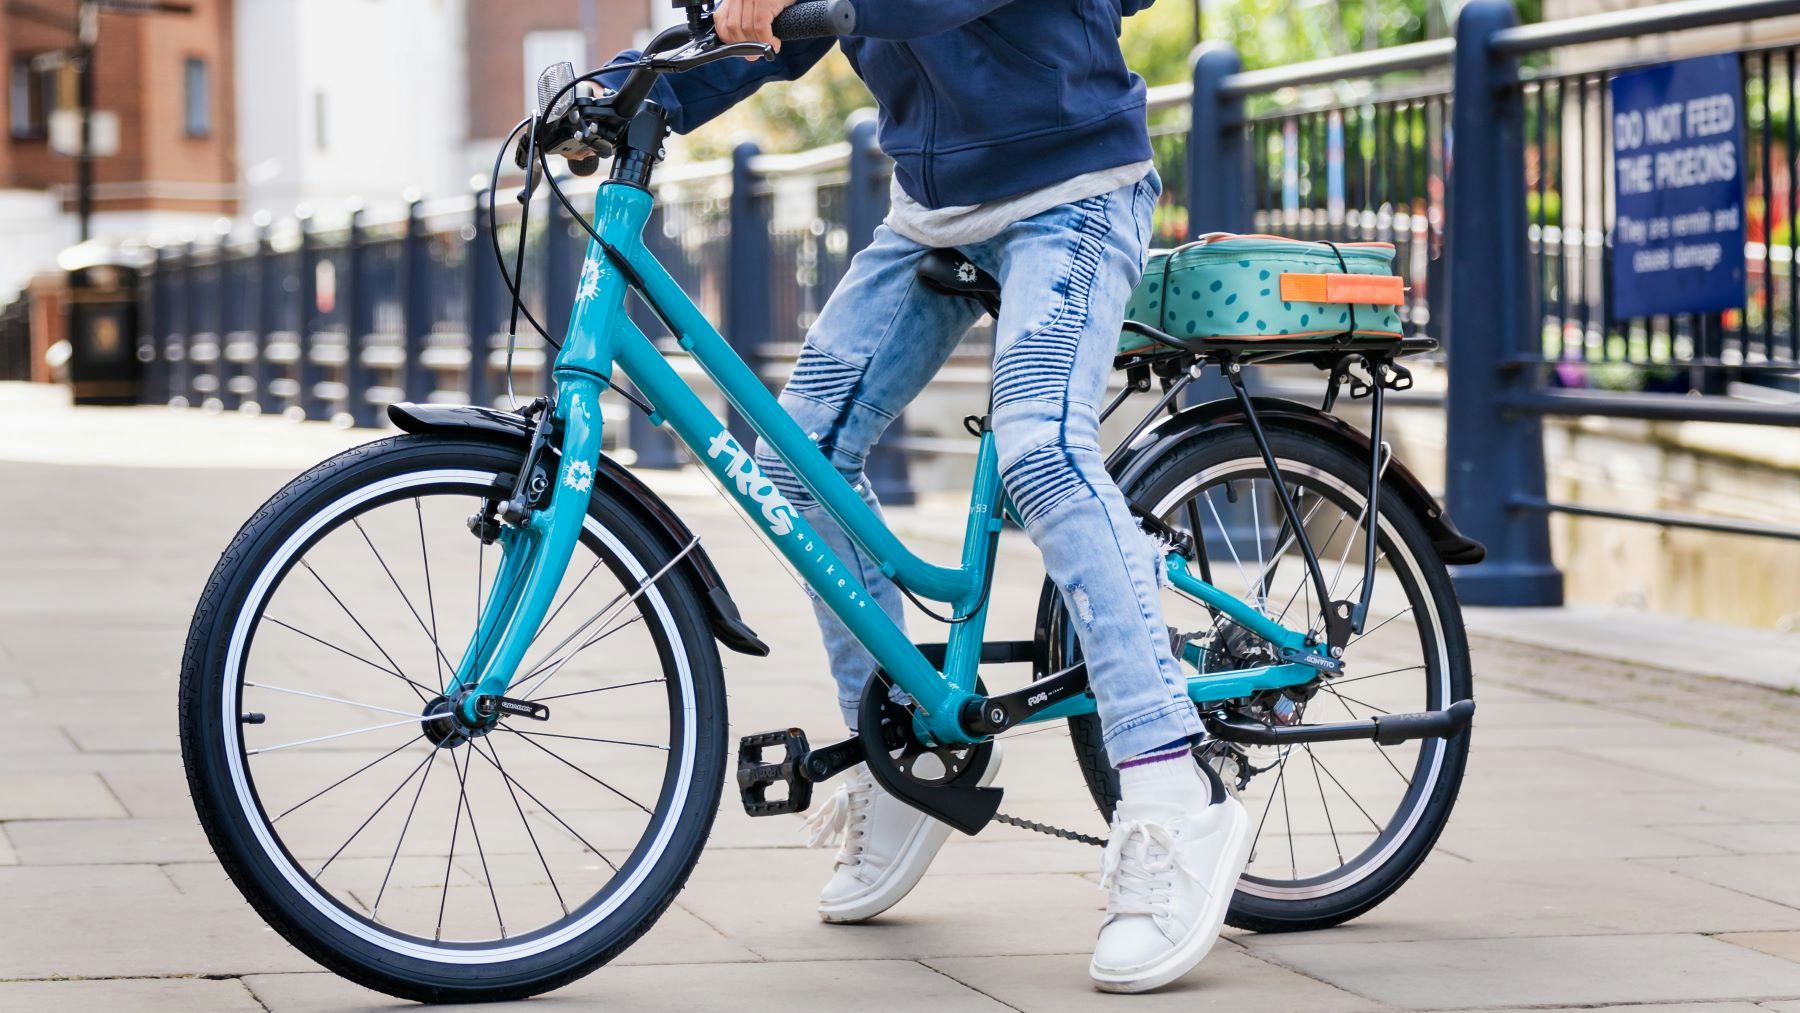 Frog Bikes' City bike range which includes the Frog City 53, 61 and 67, will initially be launched in selected IBD's in nine European locations. - Photo Frog Bikes